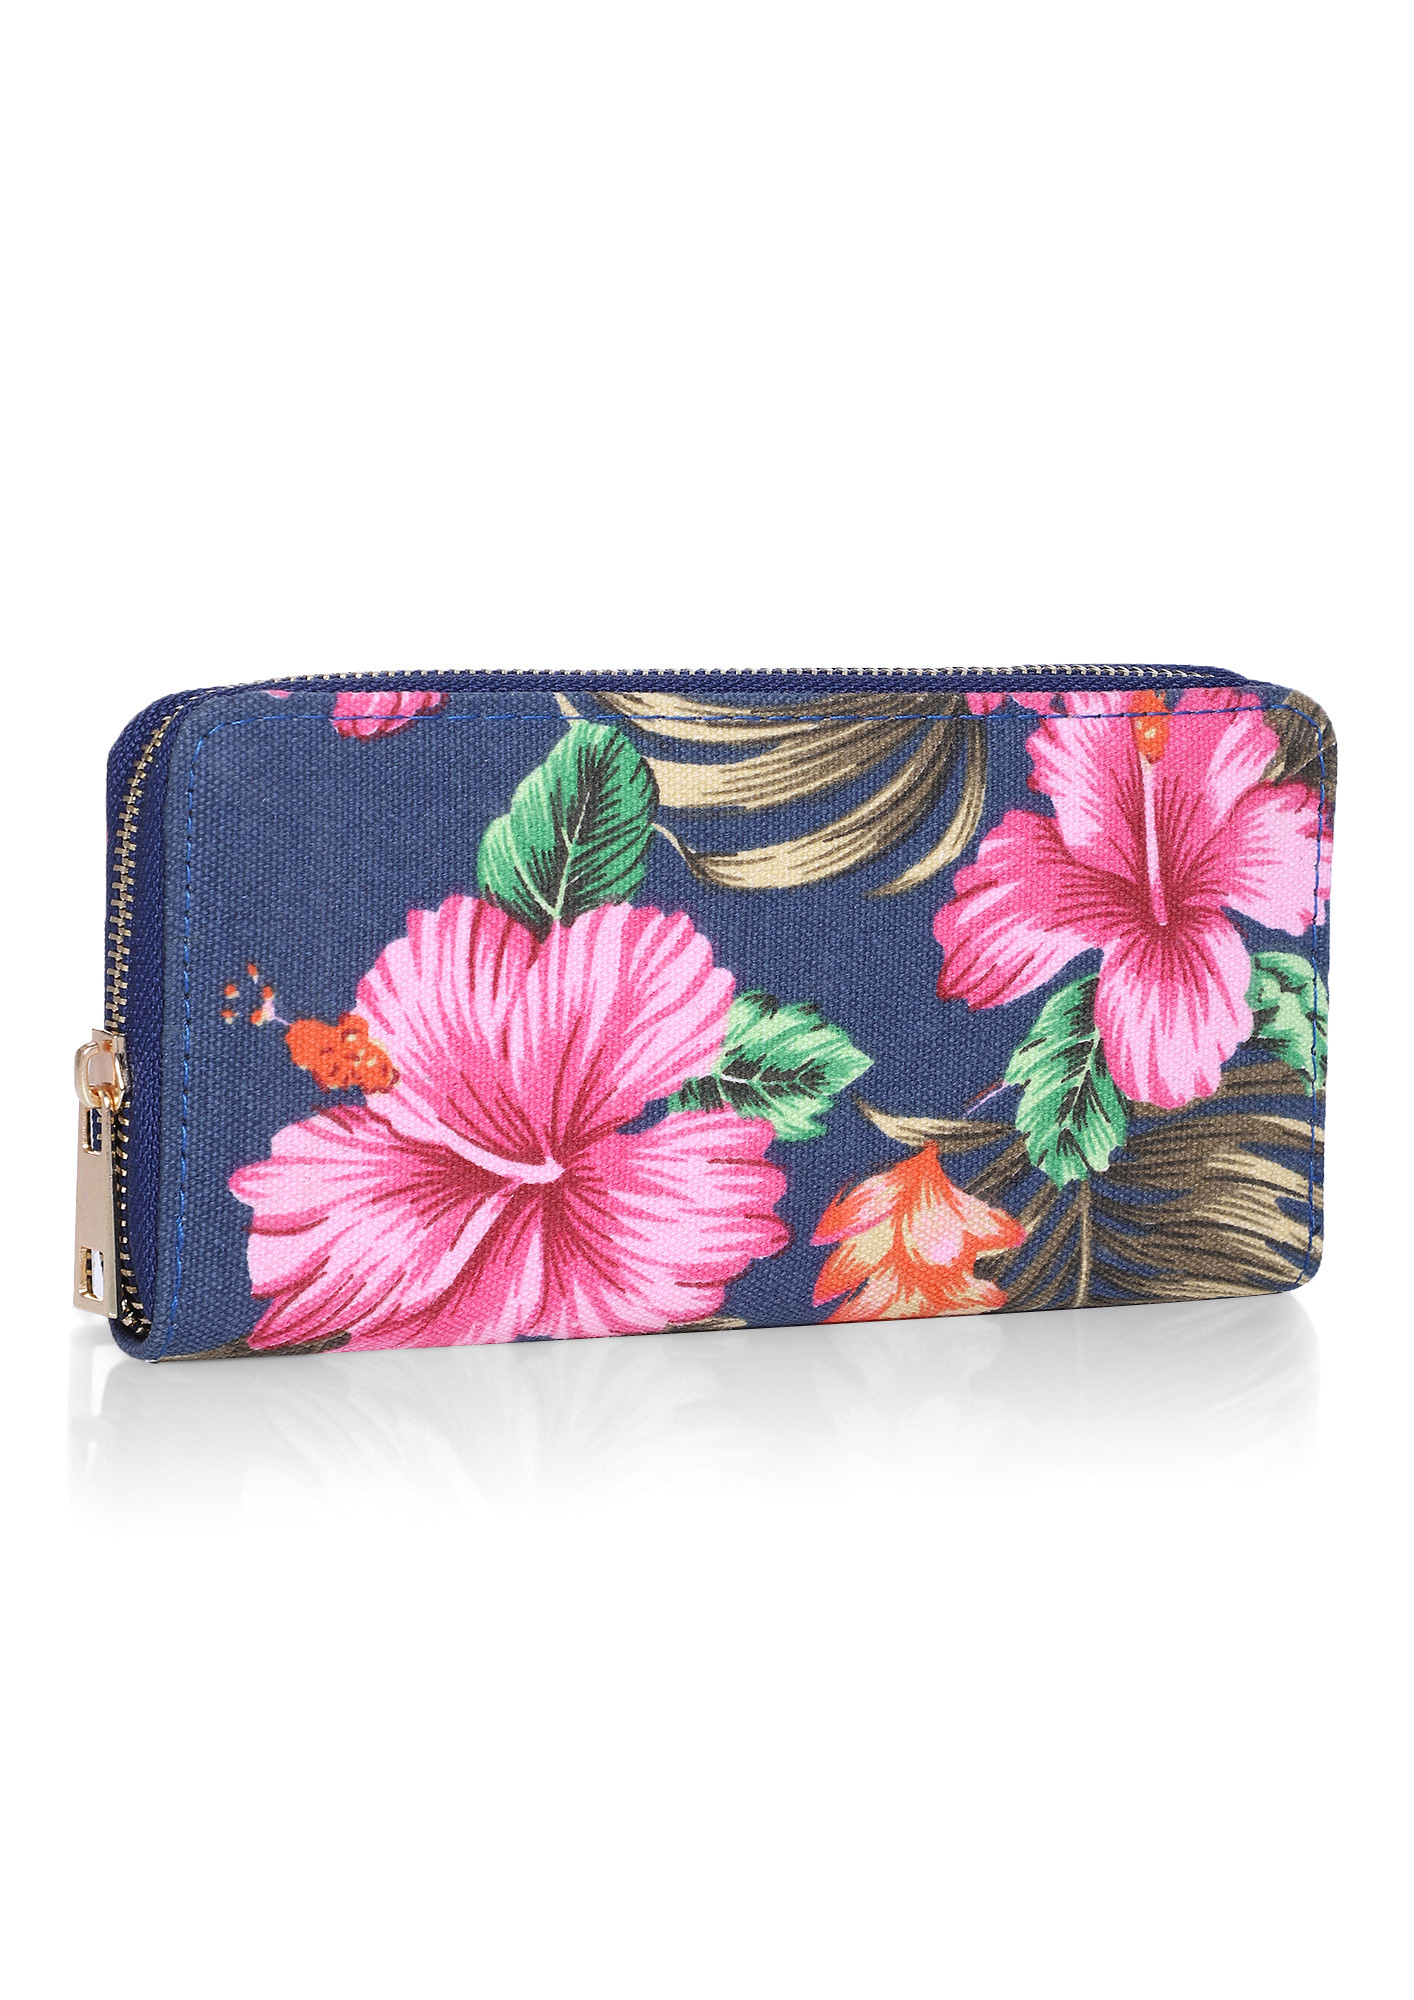 WALL OF HIBISCUS BLUE WALLET